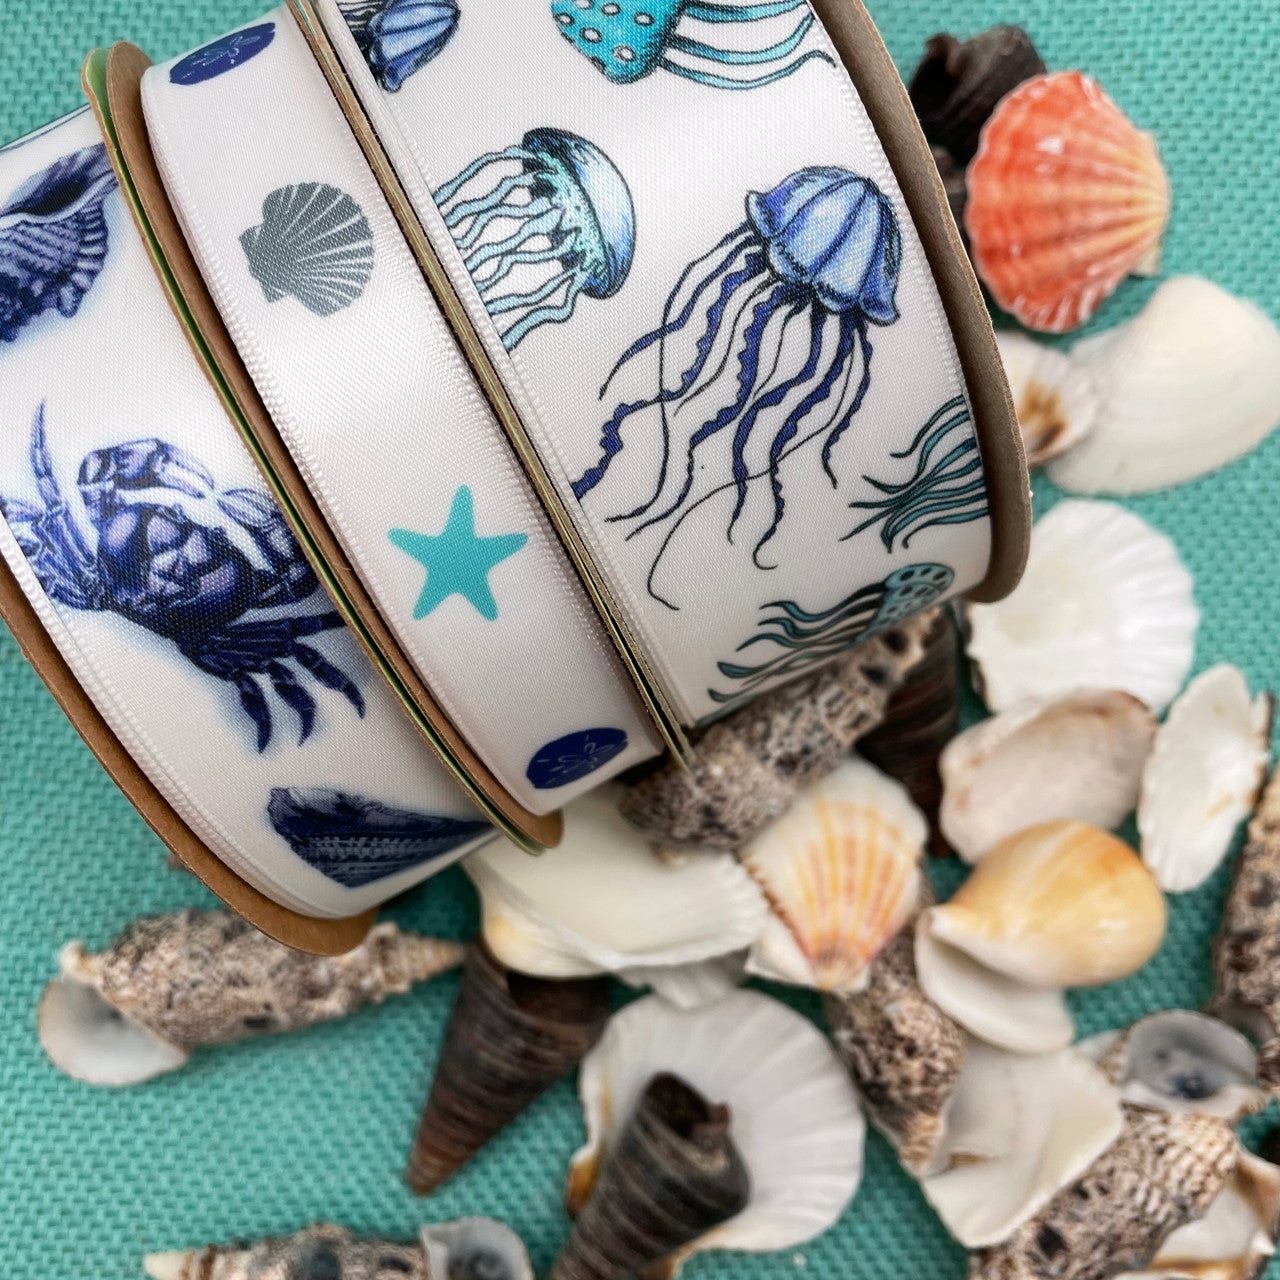 Mix and match our Jelly fish ribbon with sea creatures and sea shells for the whole compliment of gift and party decor with an ocean theme!